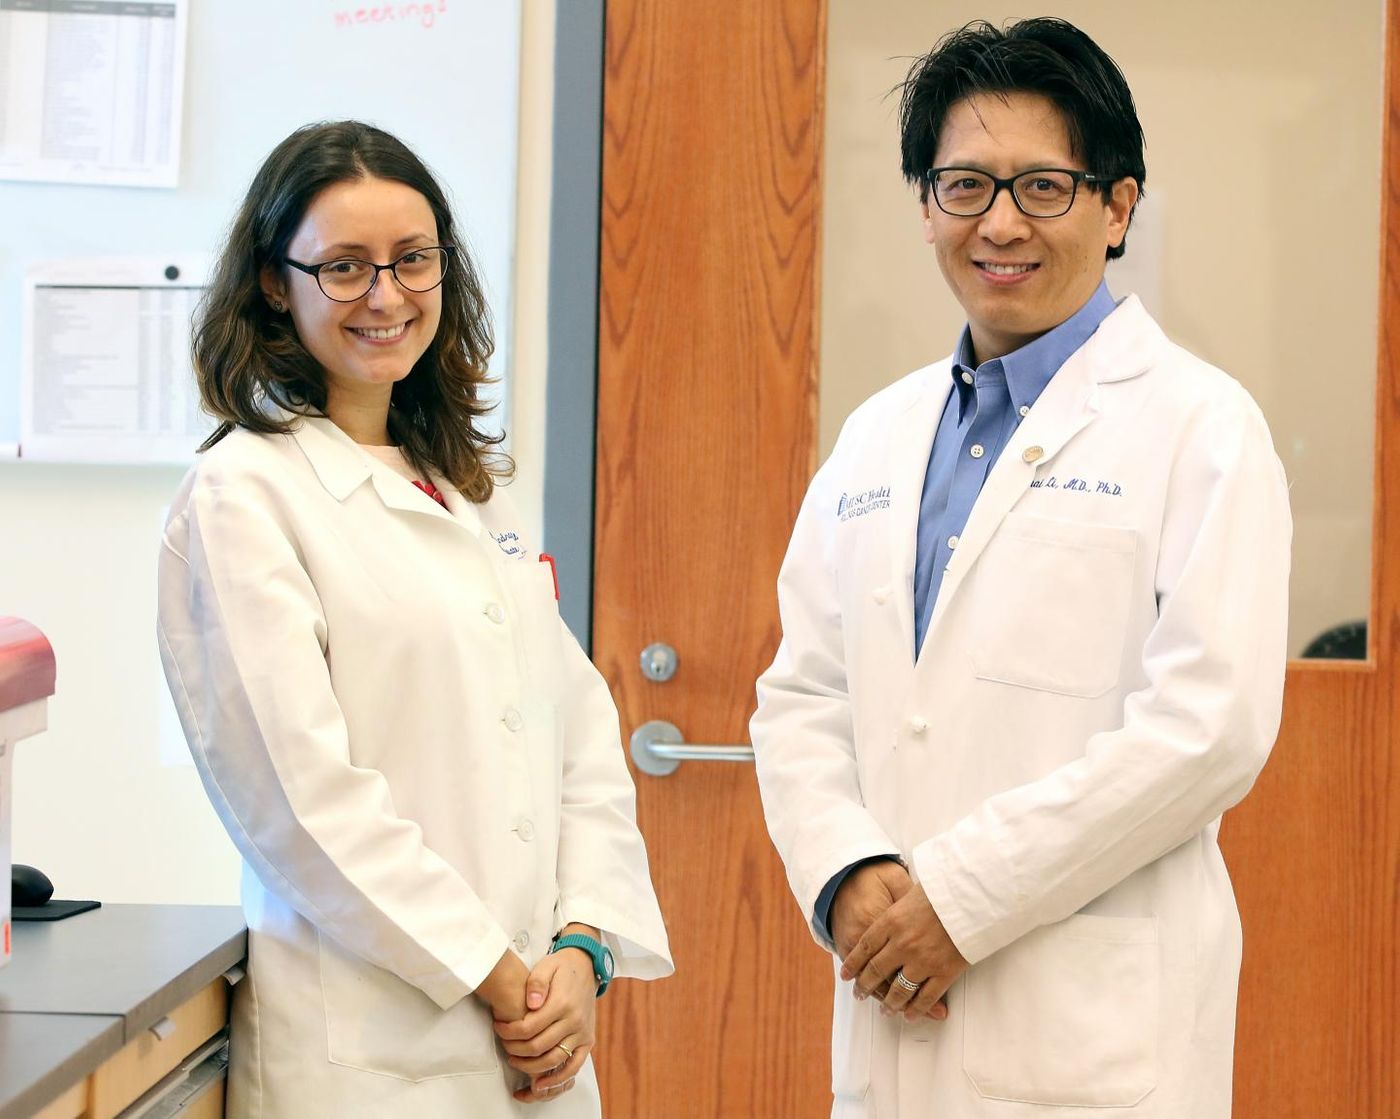 Graduate student Alessandra Metelli (left) and Zihai Li (right), MD, PhD, chair of the Department of Microbiology and Immunology at the MUSC Hollings Cancer Center. Source: Medical University of South Carolina